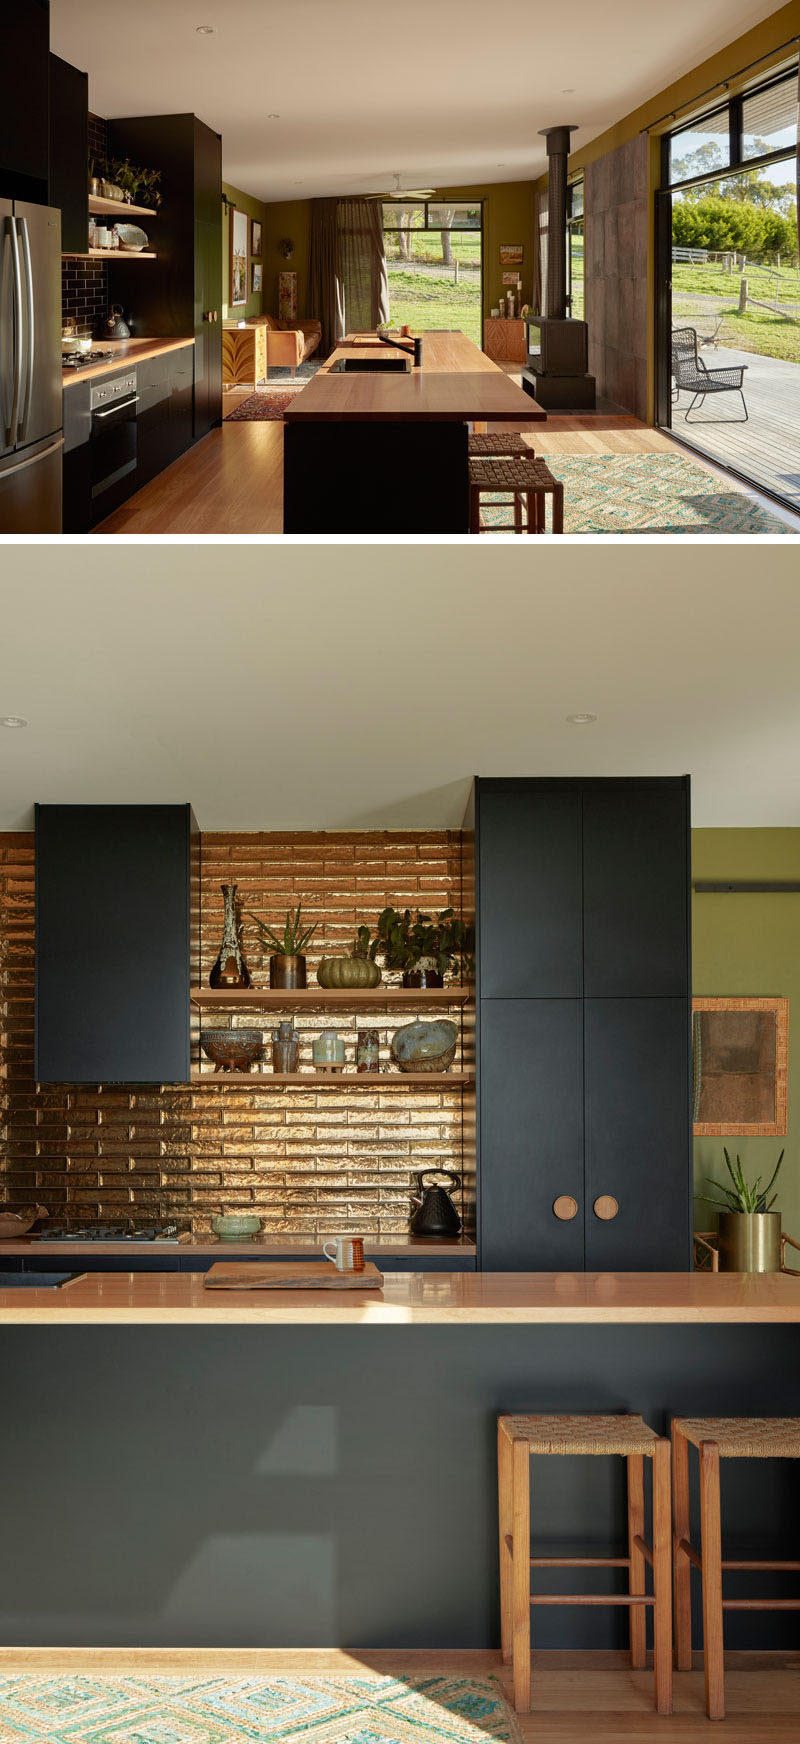 Sliding doors that fill the interior of this modern house with natural light and open the interior to the porch, creating indoor/outdoor living experience, while a metallic backsplash brightens up matte black kitchen cabinets. #ModernInterior #BlackKitchen #MetallicBacksplash